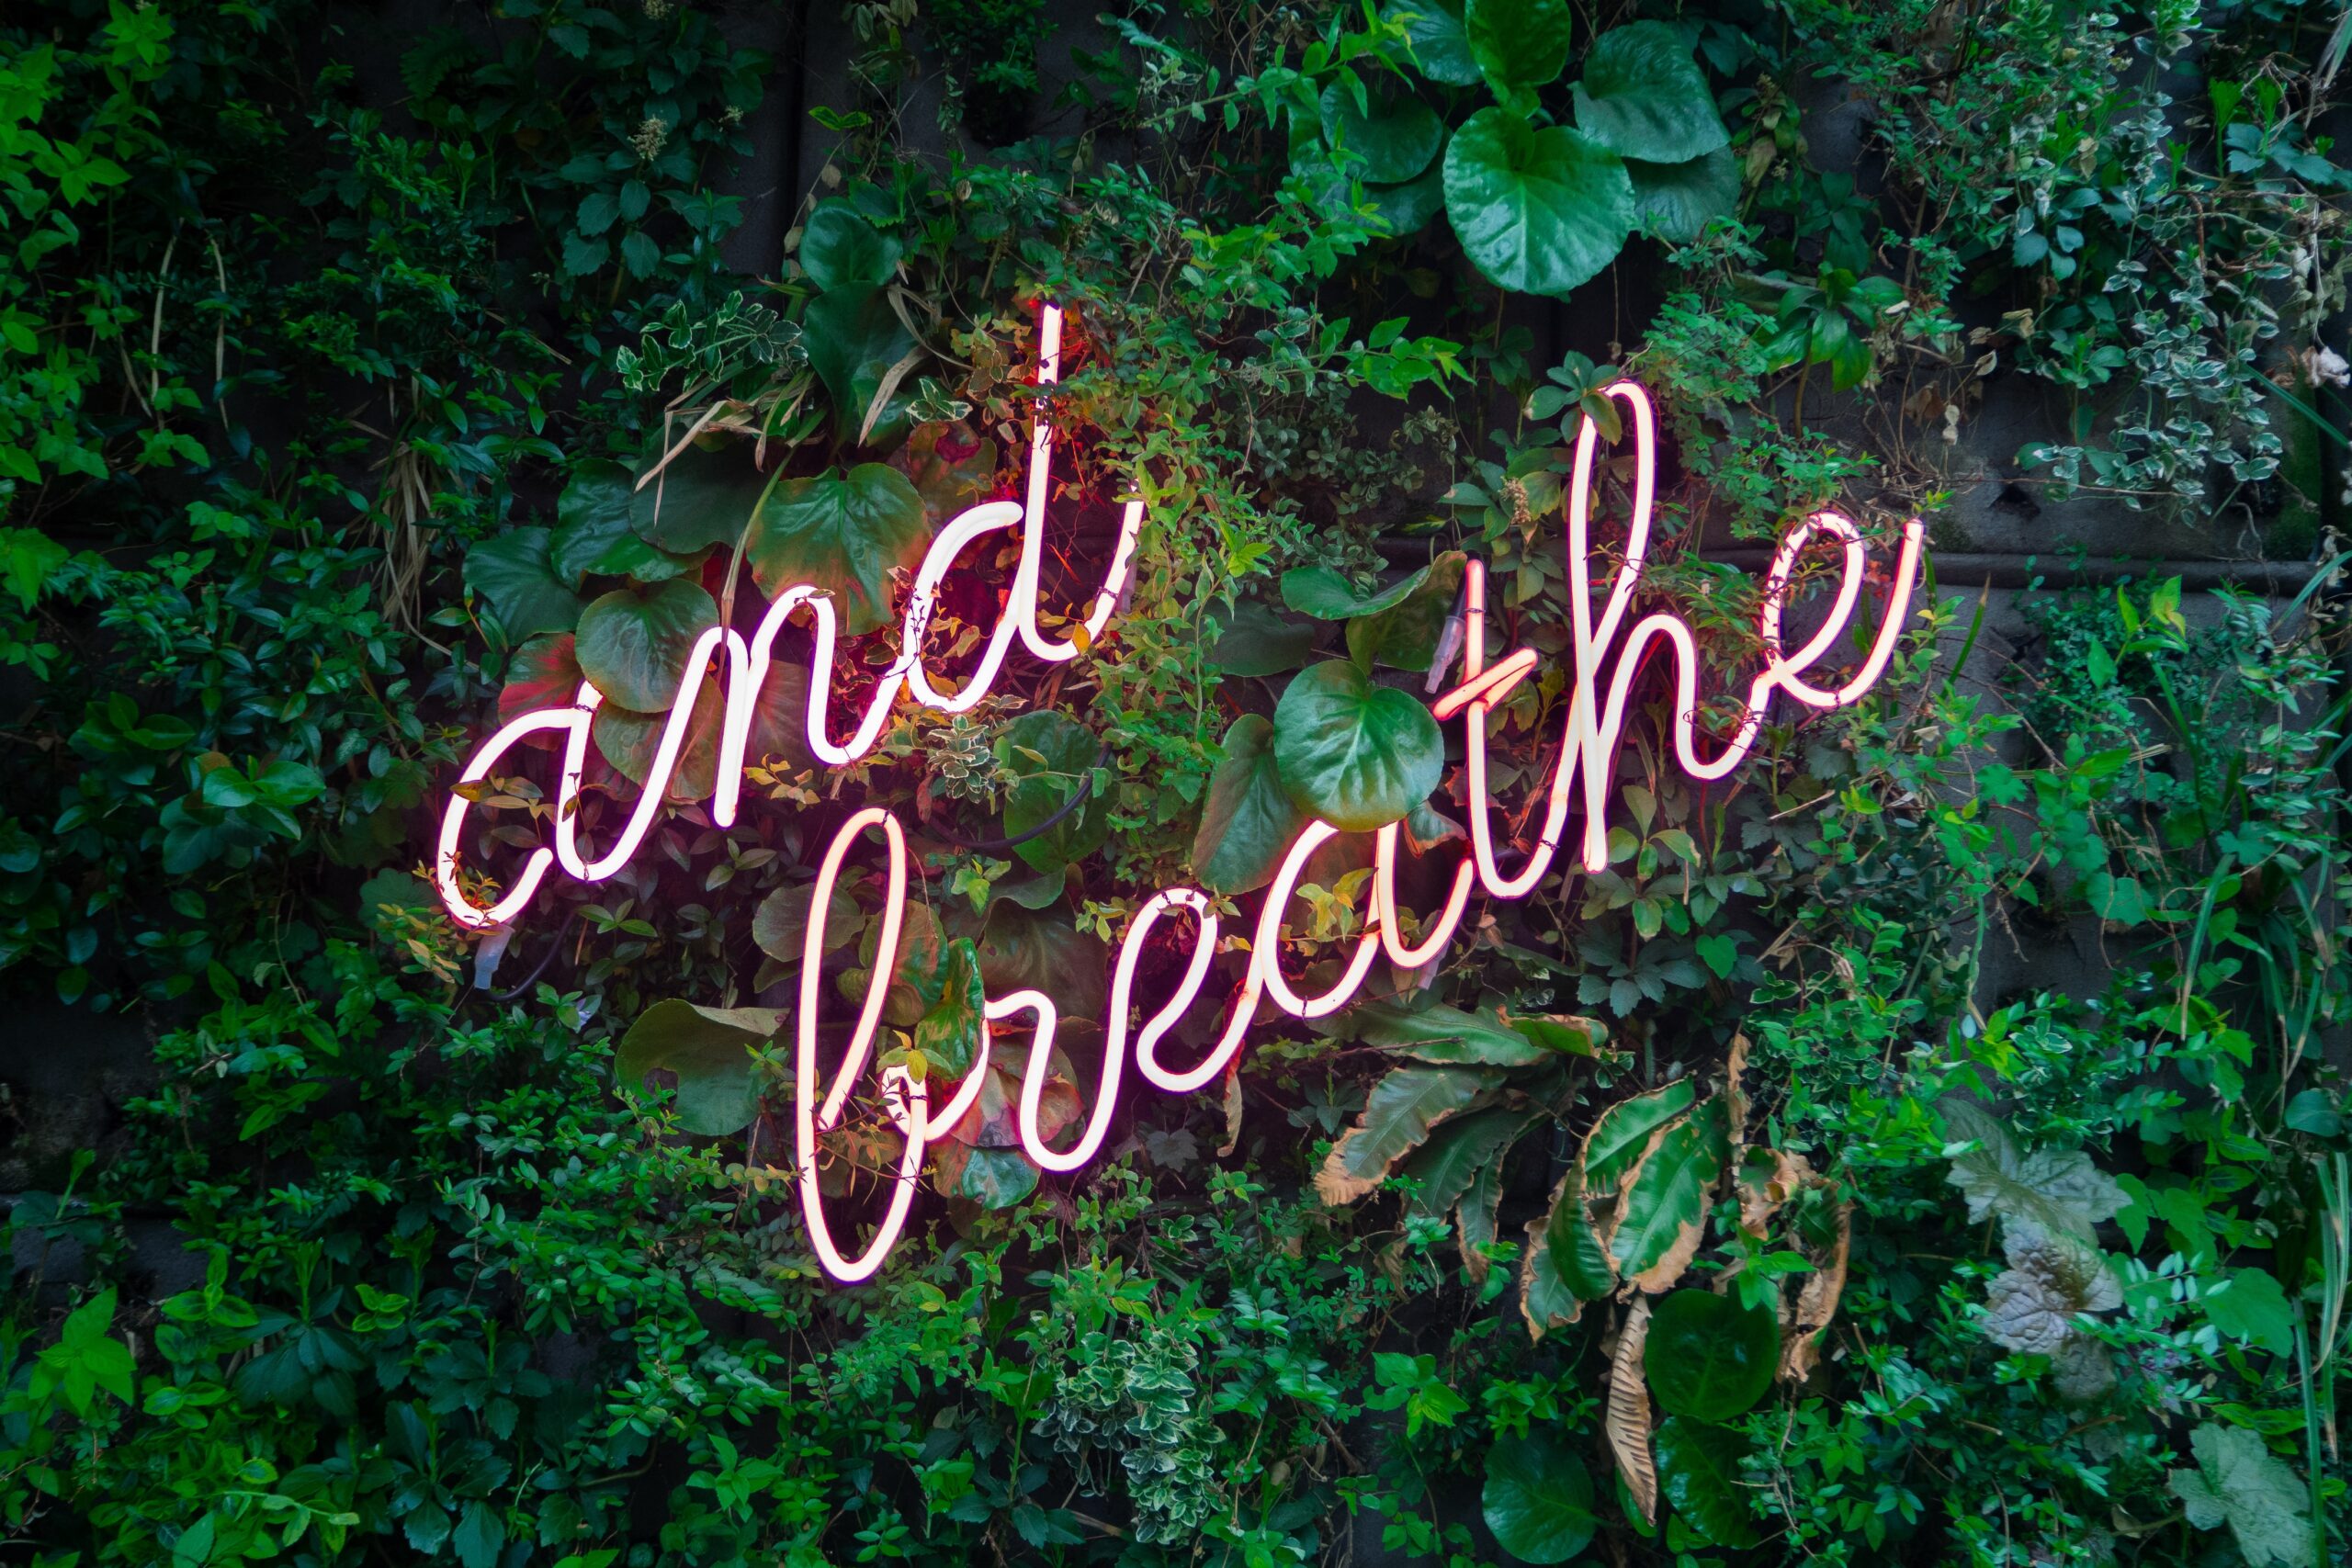 Taking a deep breath is a simple, yet effective, way to reduce anxiety